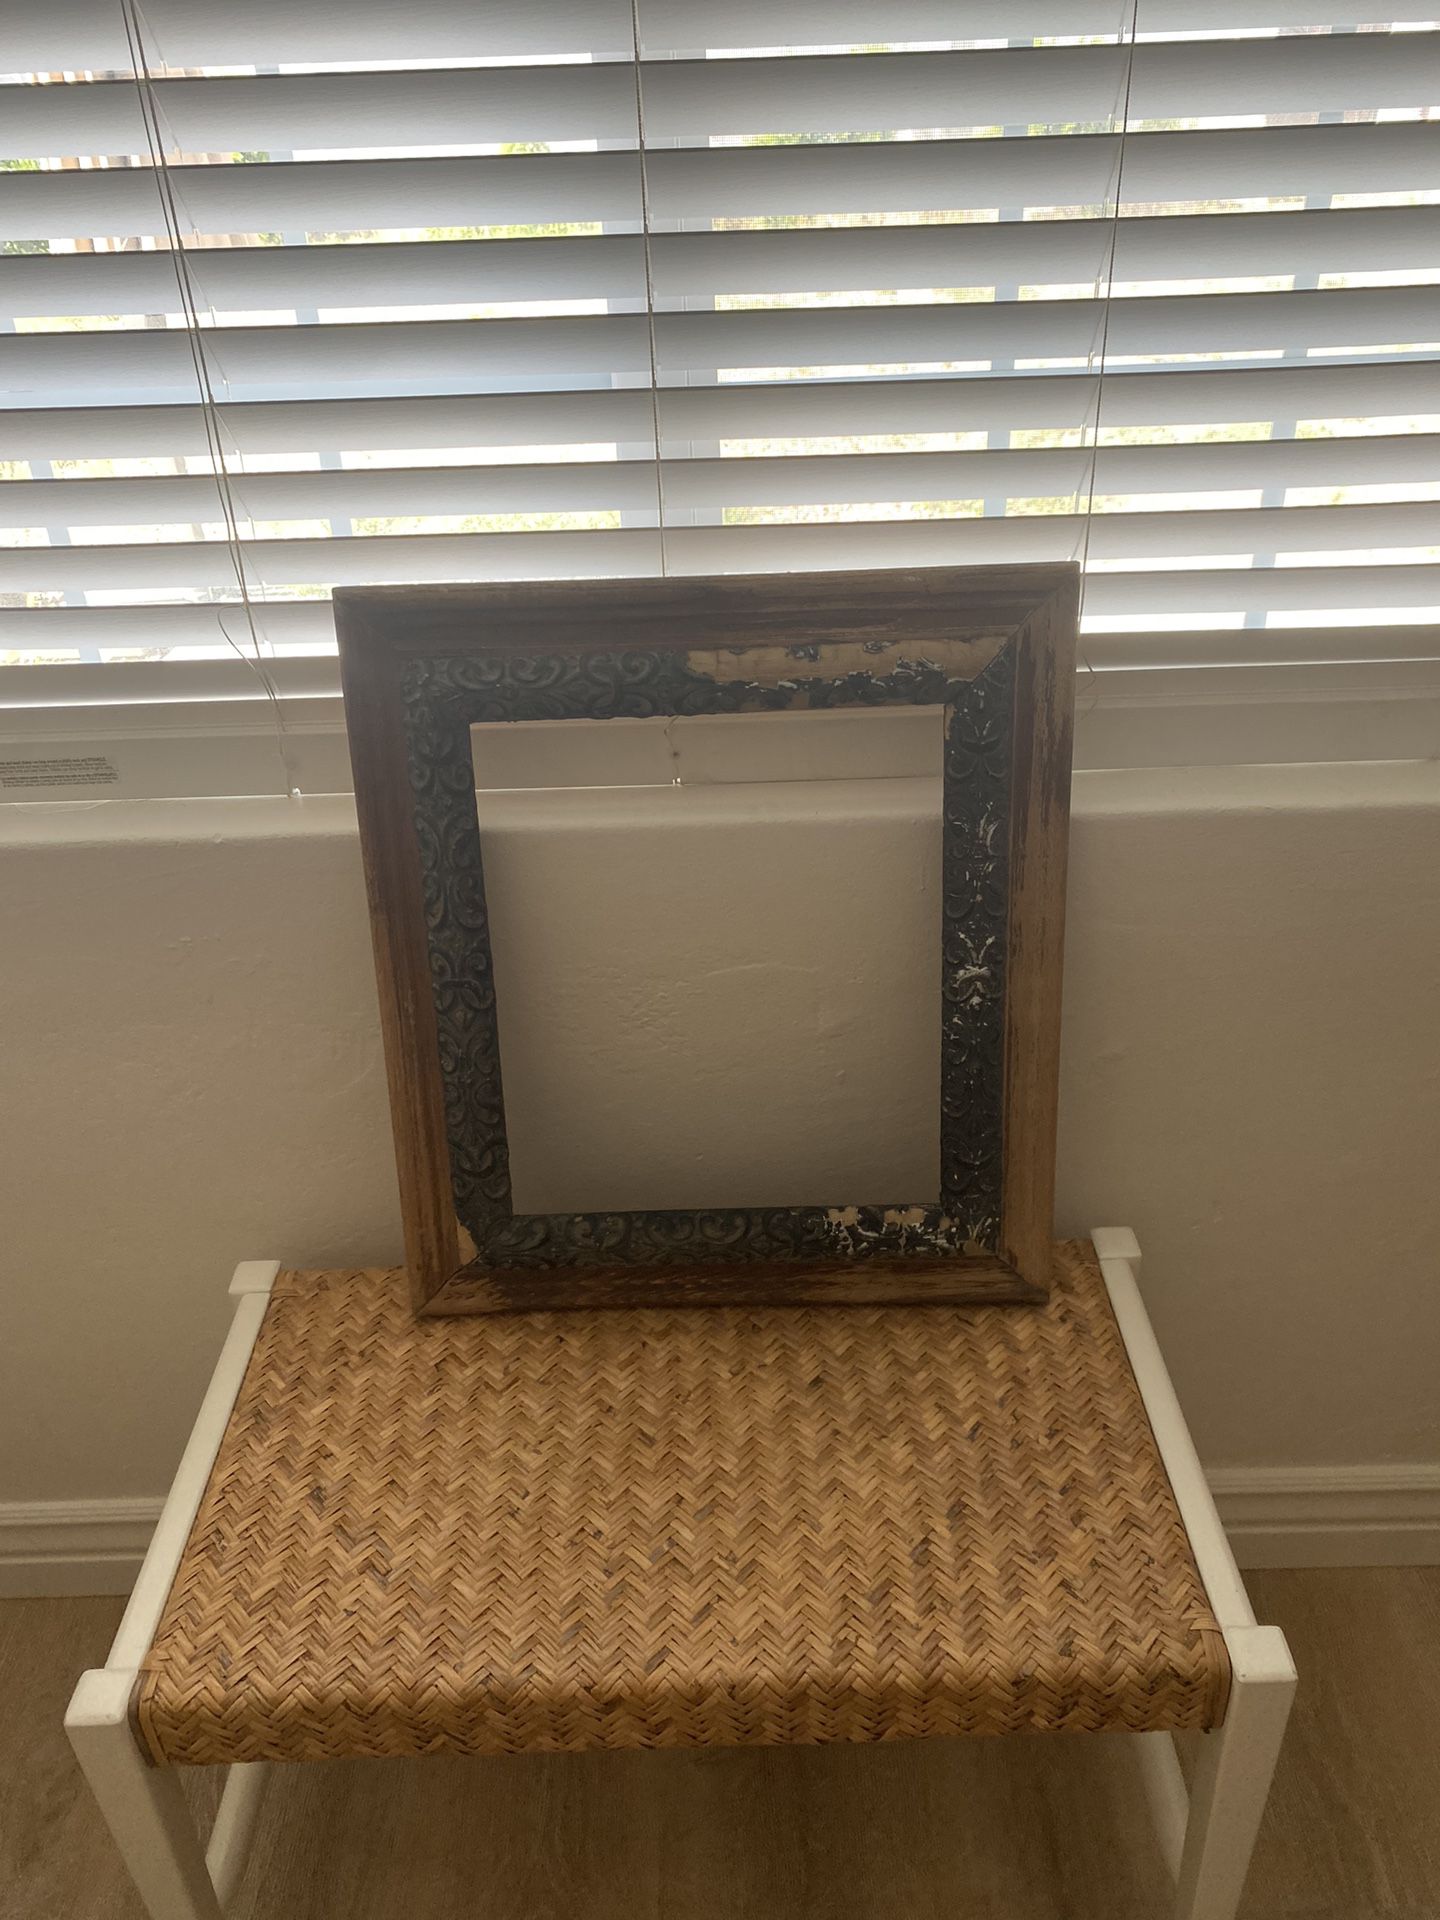 Antique Wood Picture Frame